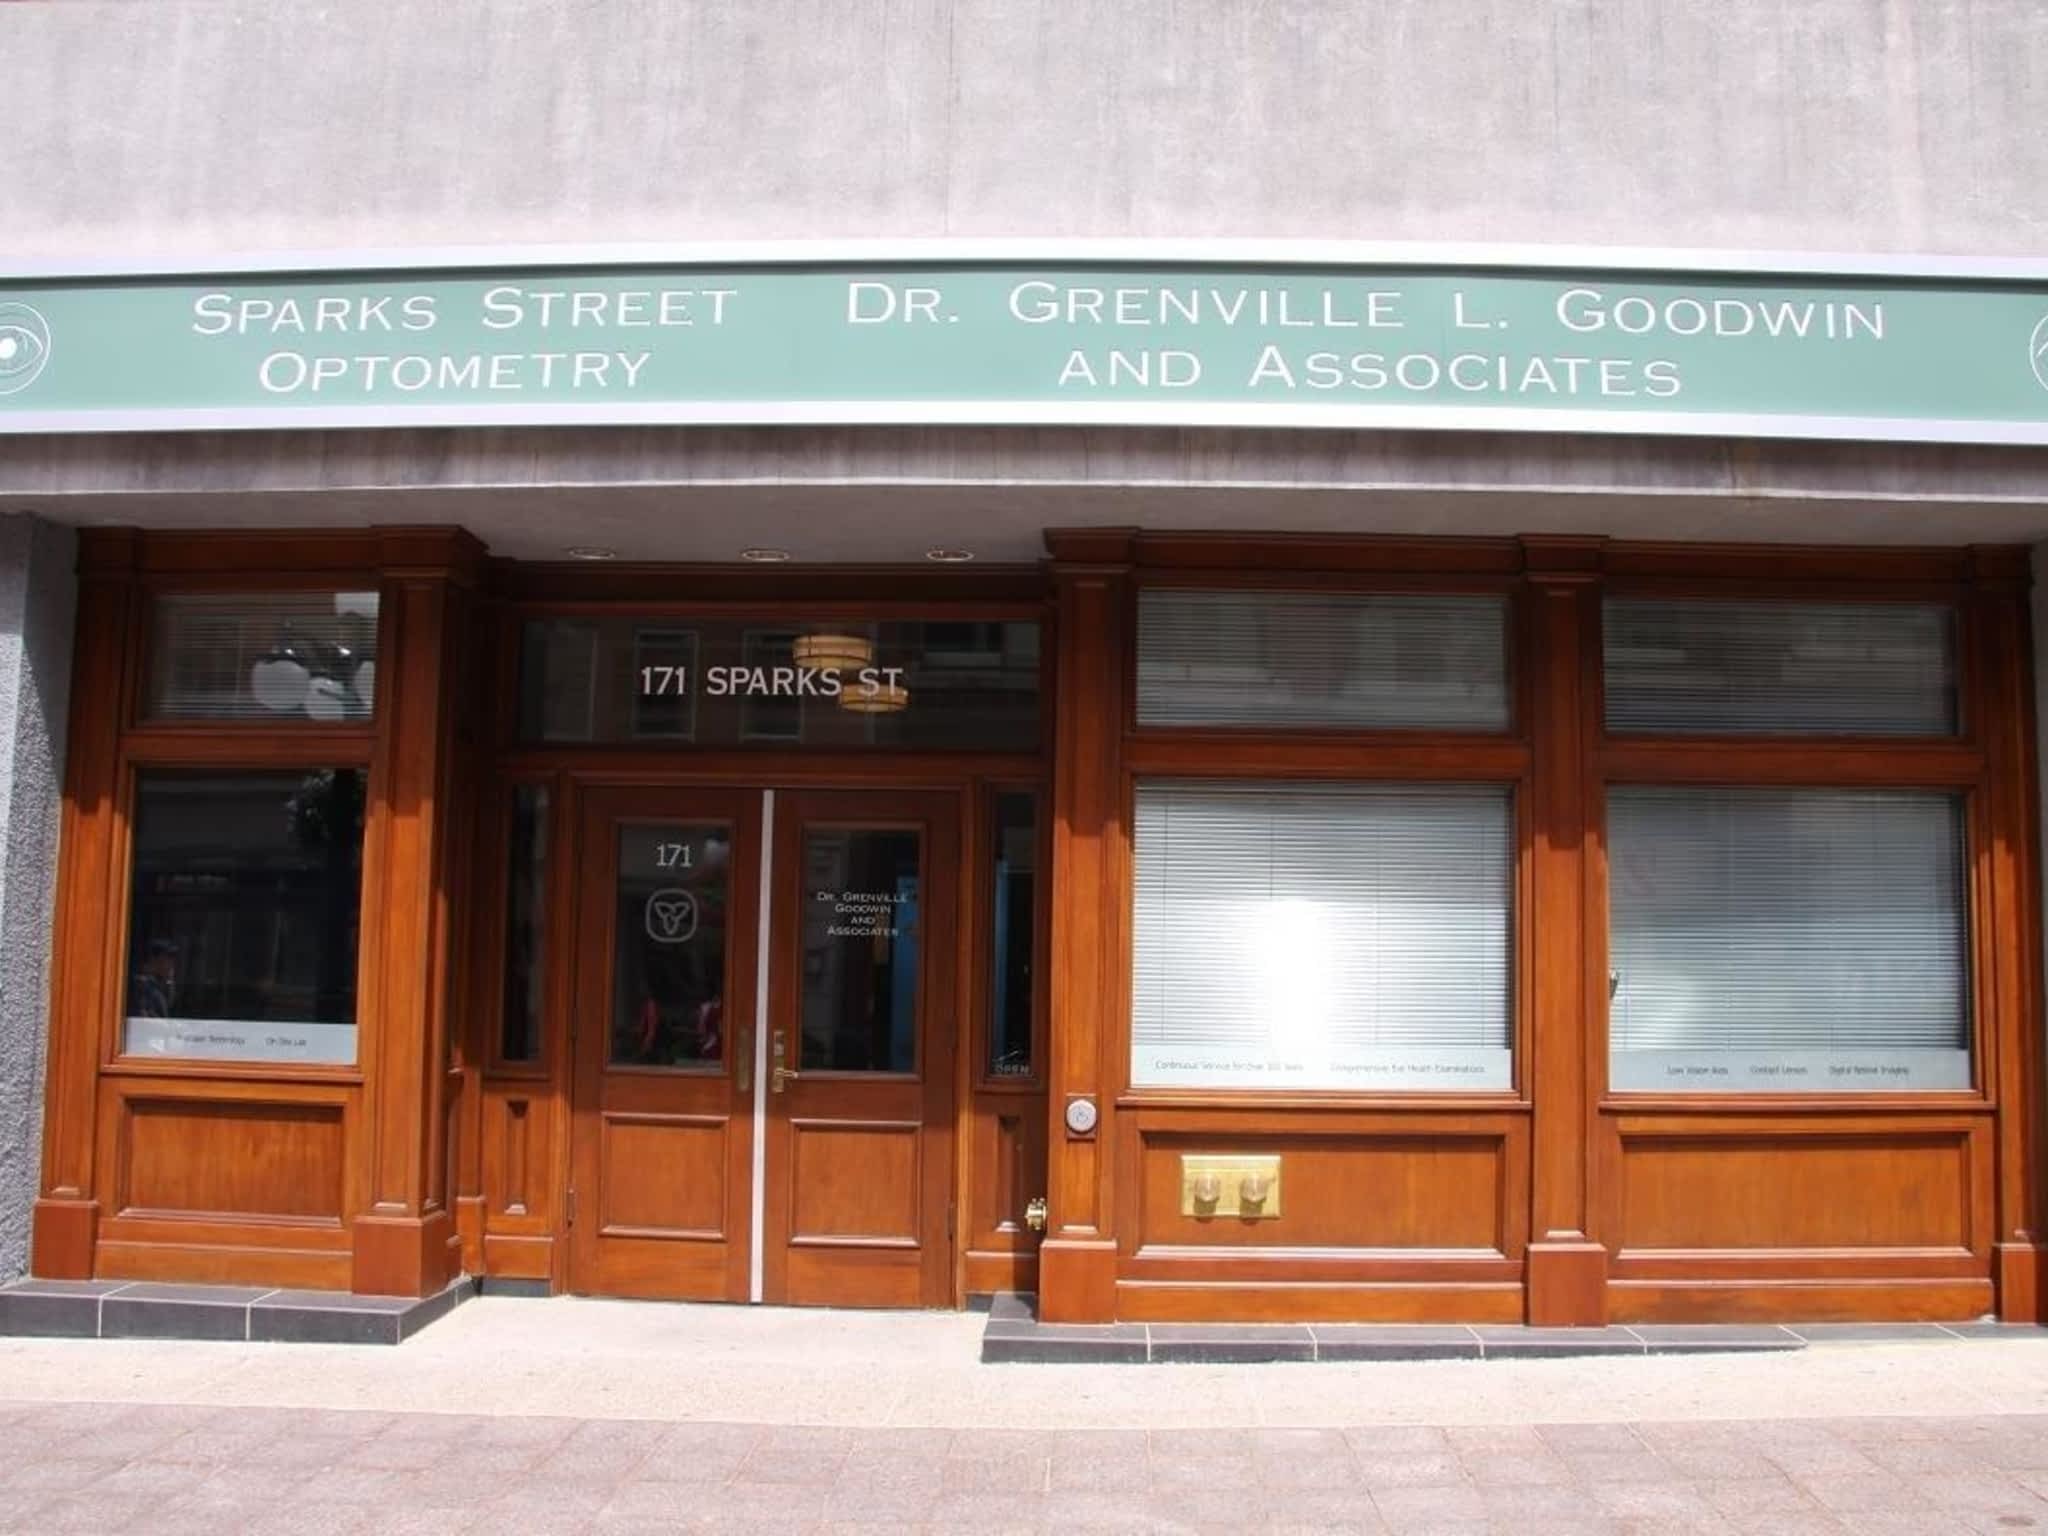 photo Goodwin Grenville L Dr - Sparks Street Optometry